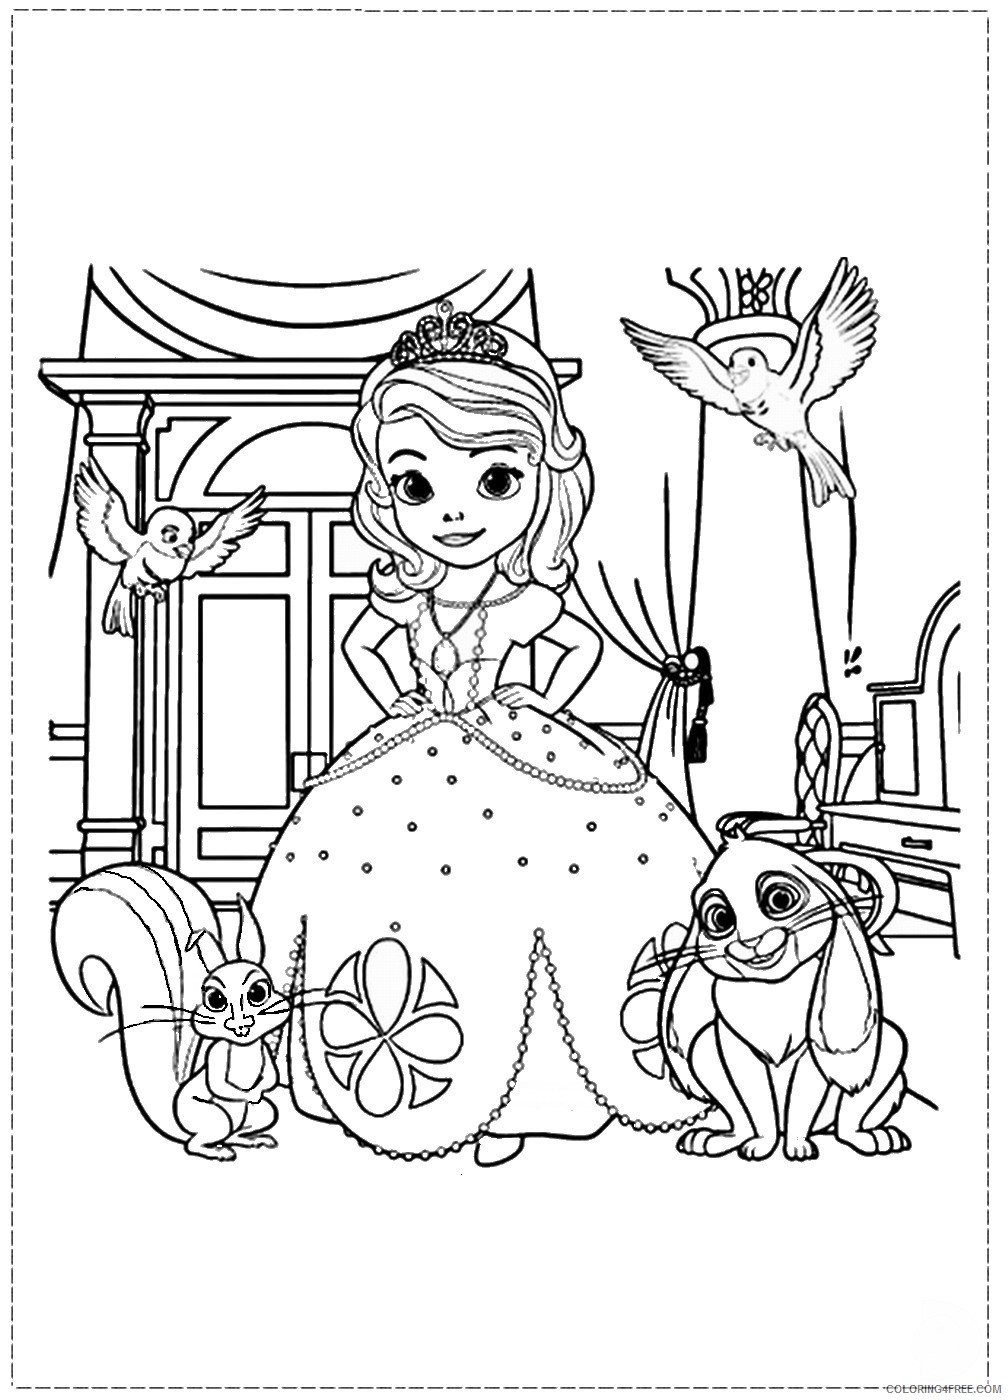 Sofia the First Coloring Pages Cartoons Sofia_the_First_coloring_22 Printable 2020 5852 Coloring4free